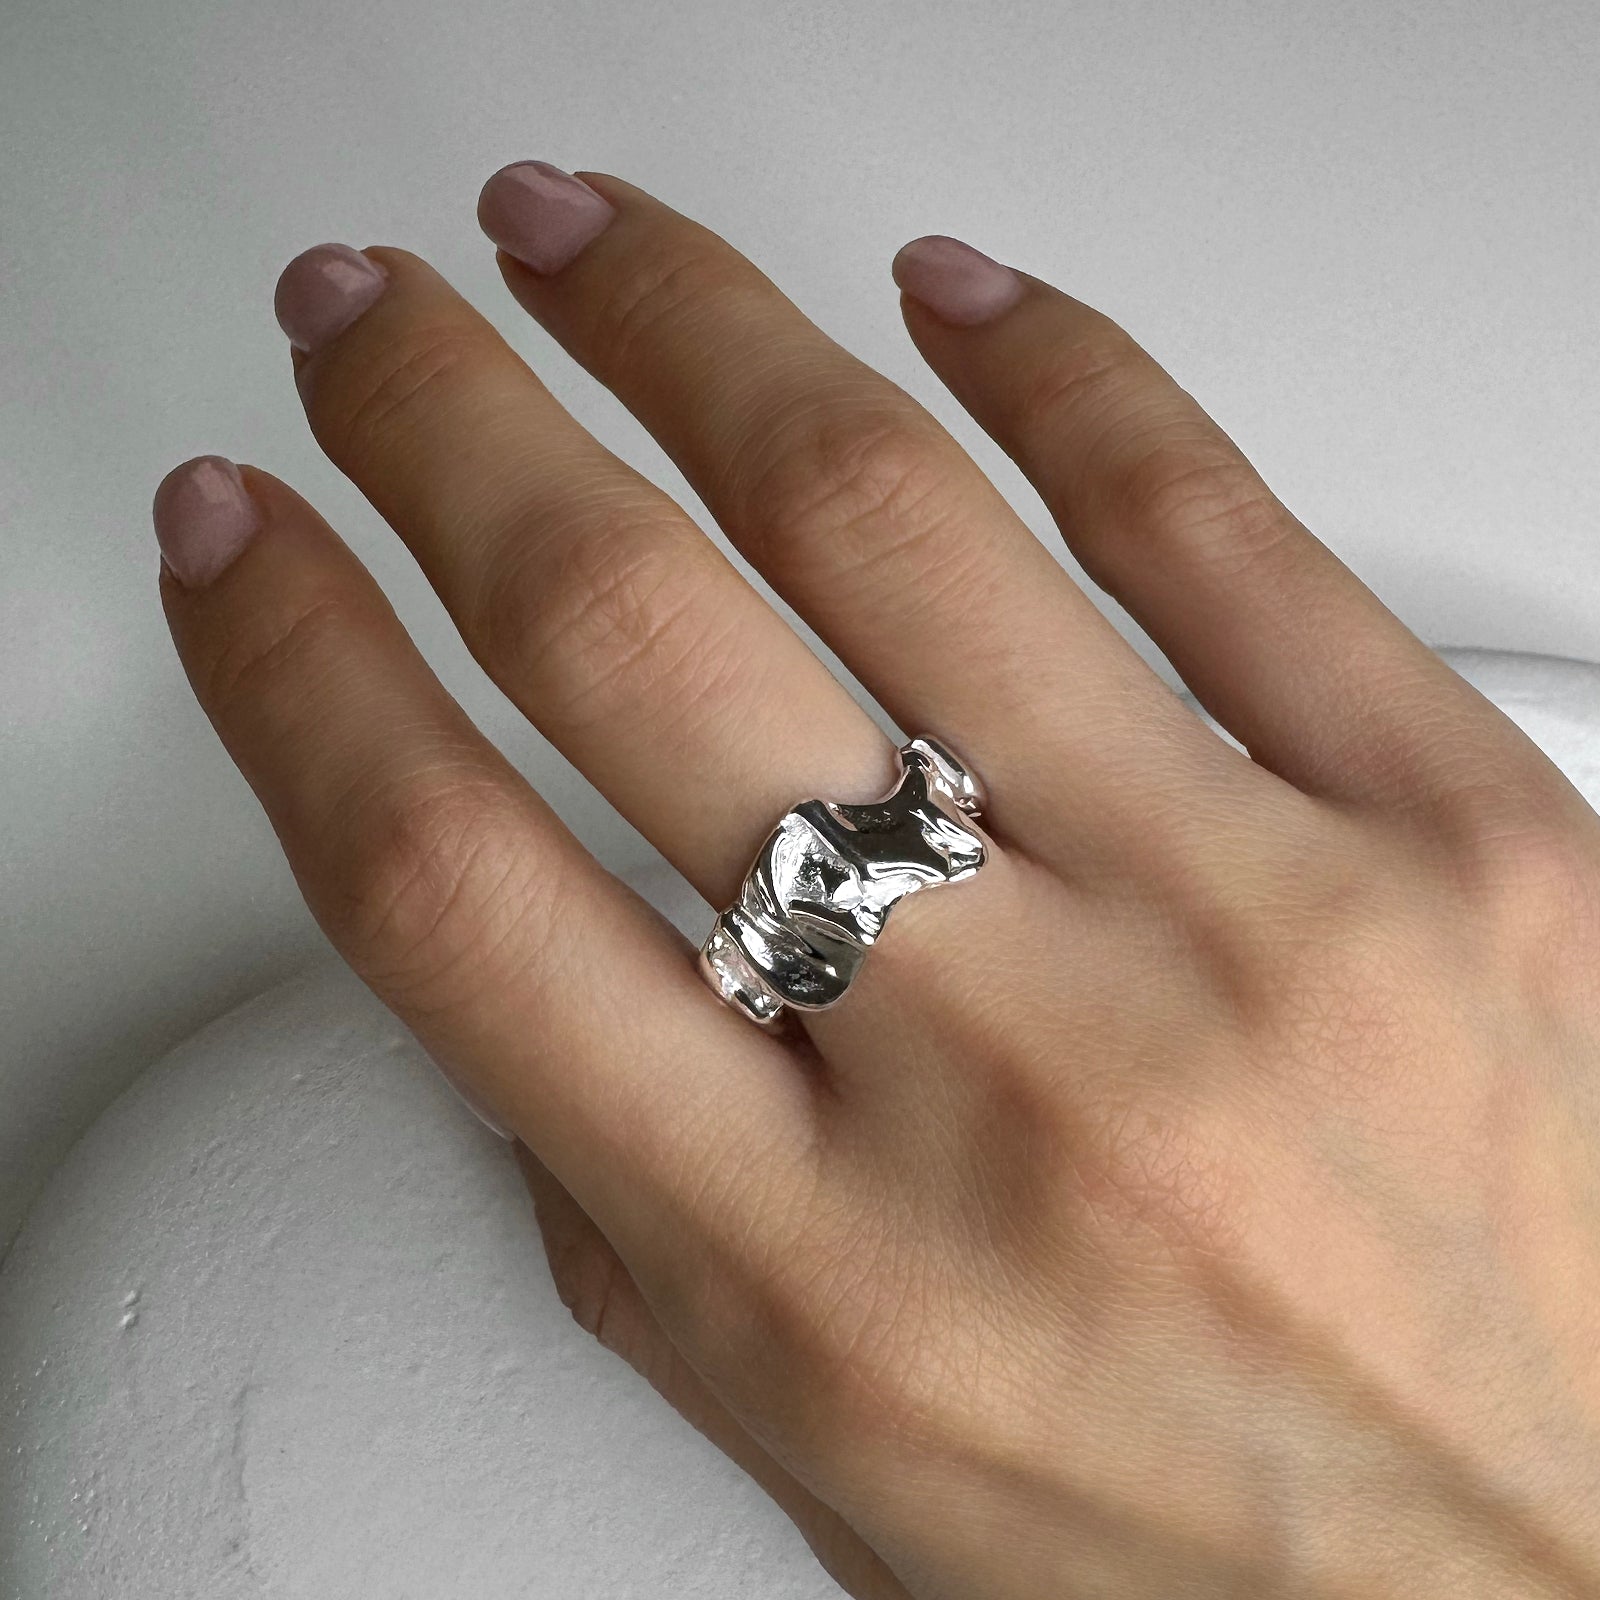 Model hand view of Abstract Wrinkle Ring. This silver ring has an organic shape, adjustable and made with genuine 925 sterling silver. 